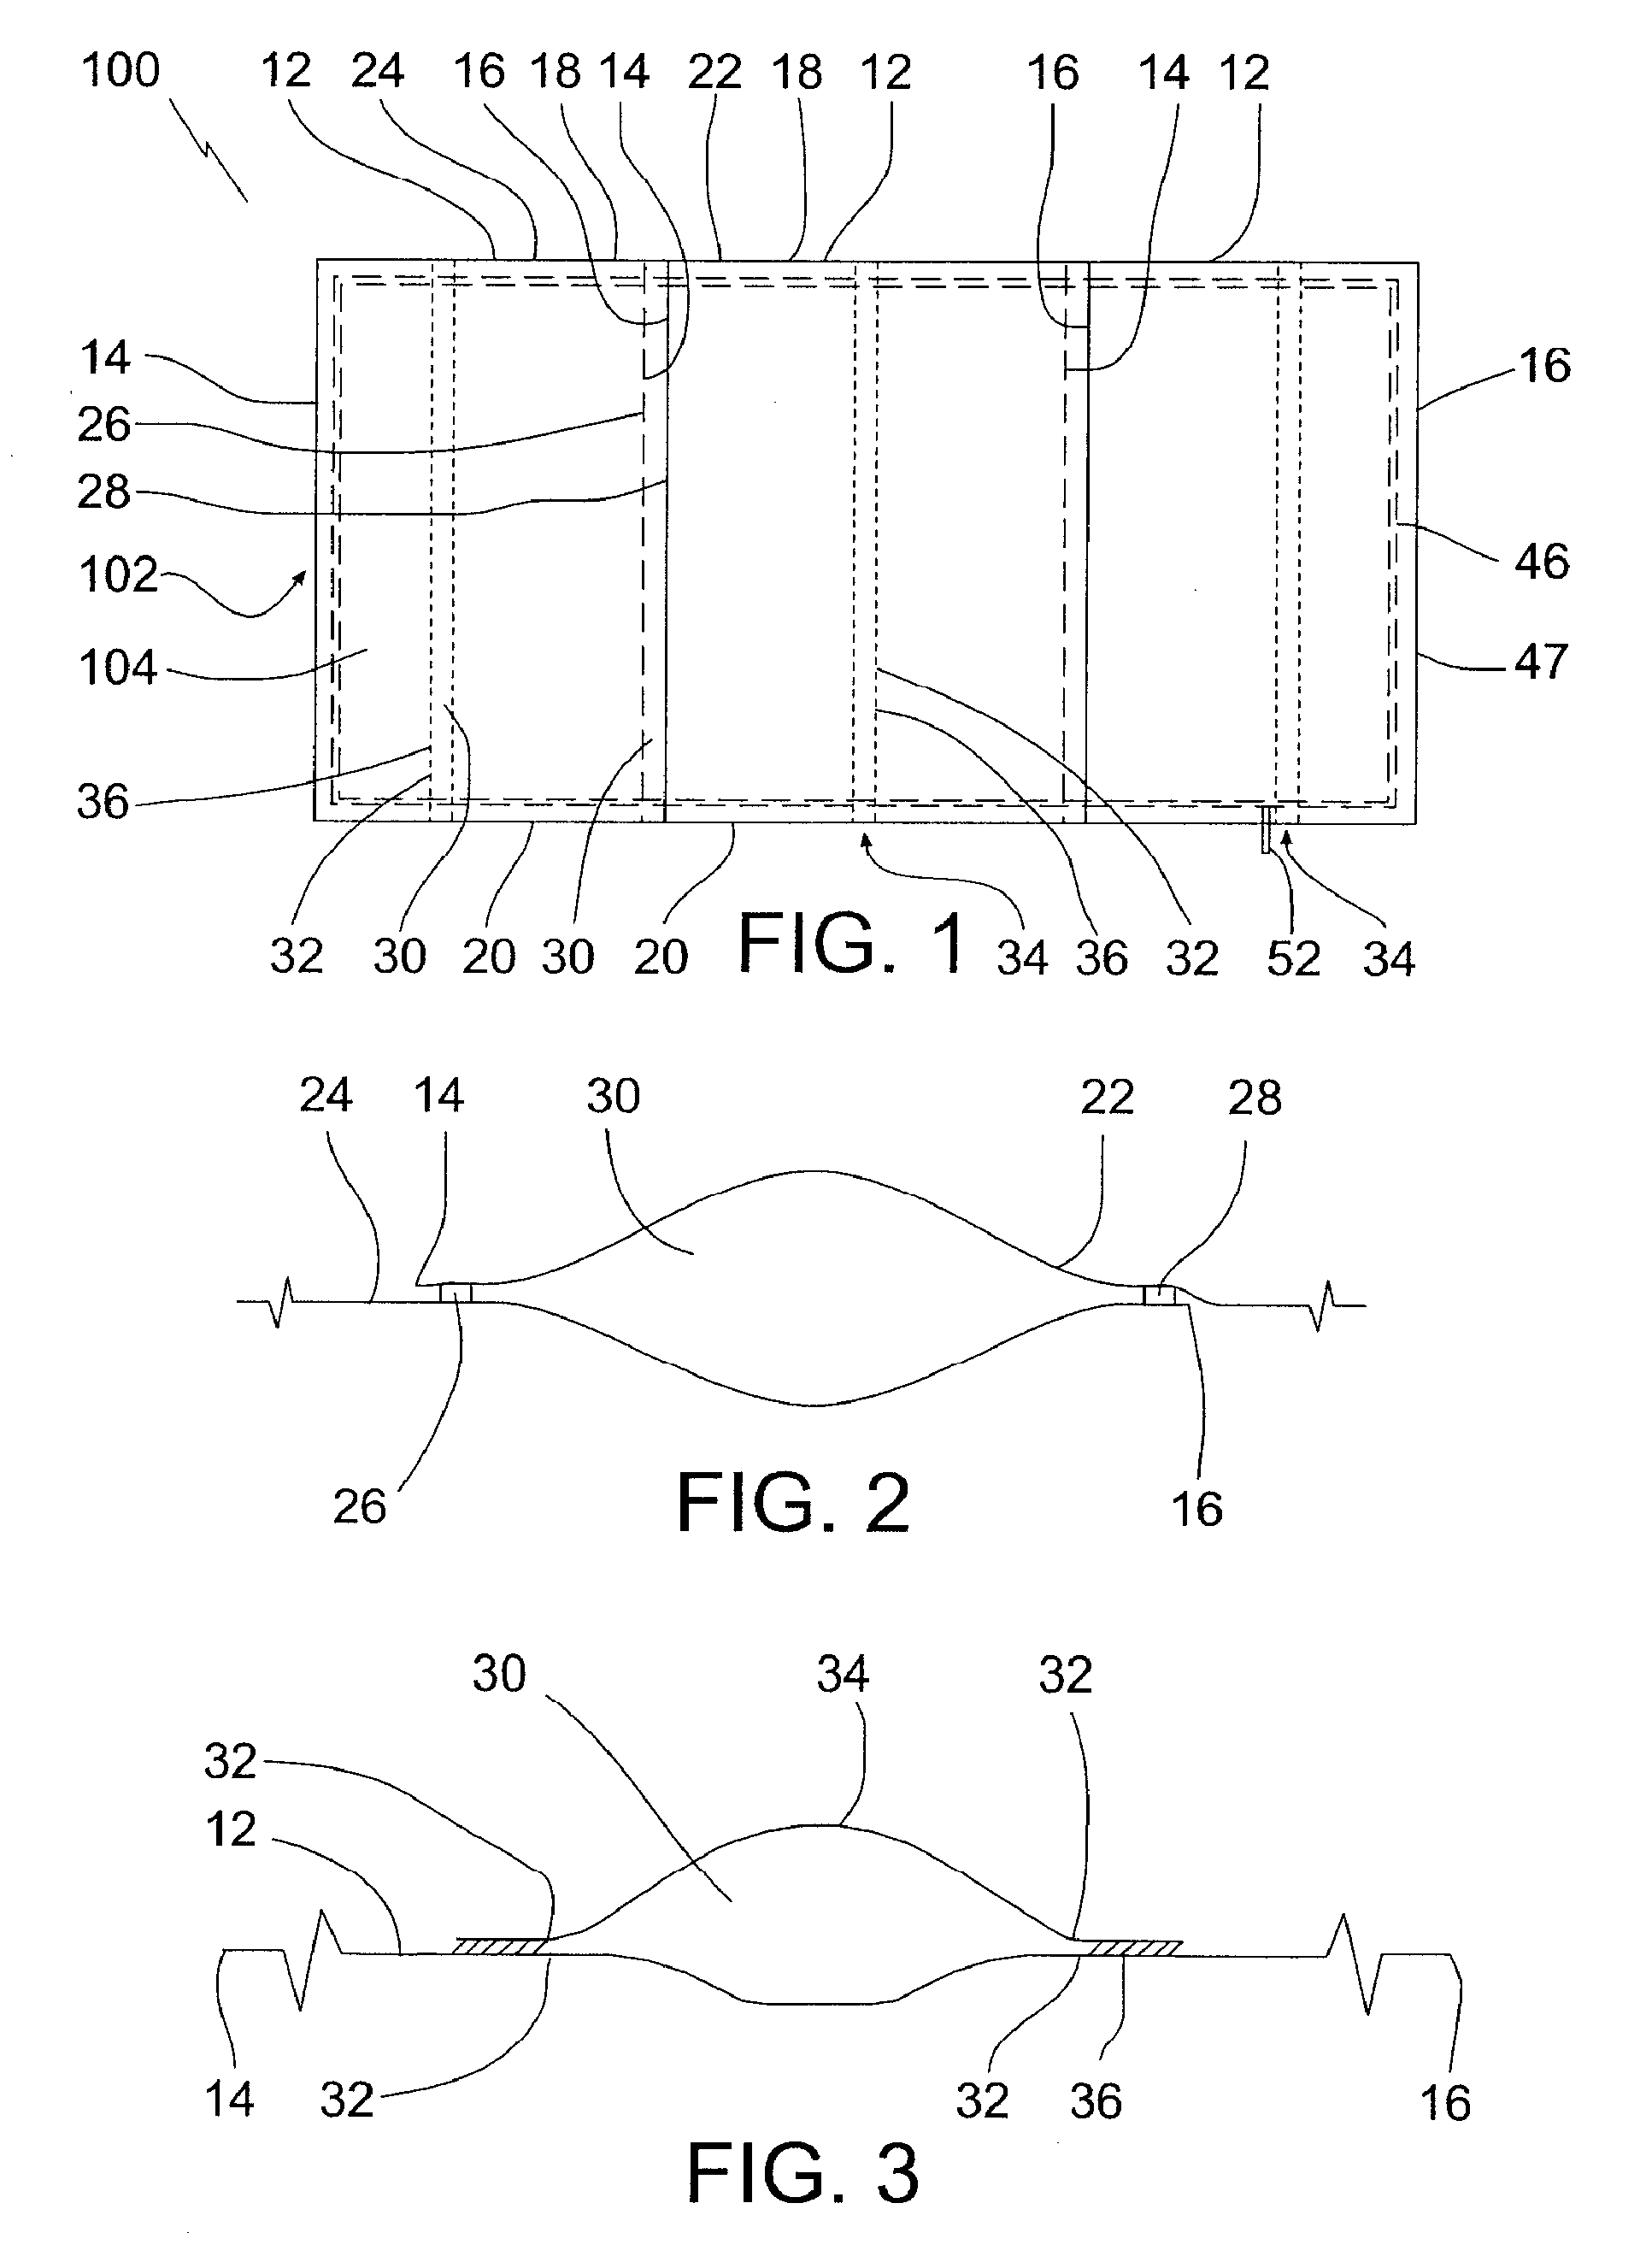 Method of securing elongated objects to a floating cover